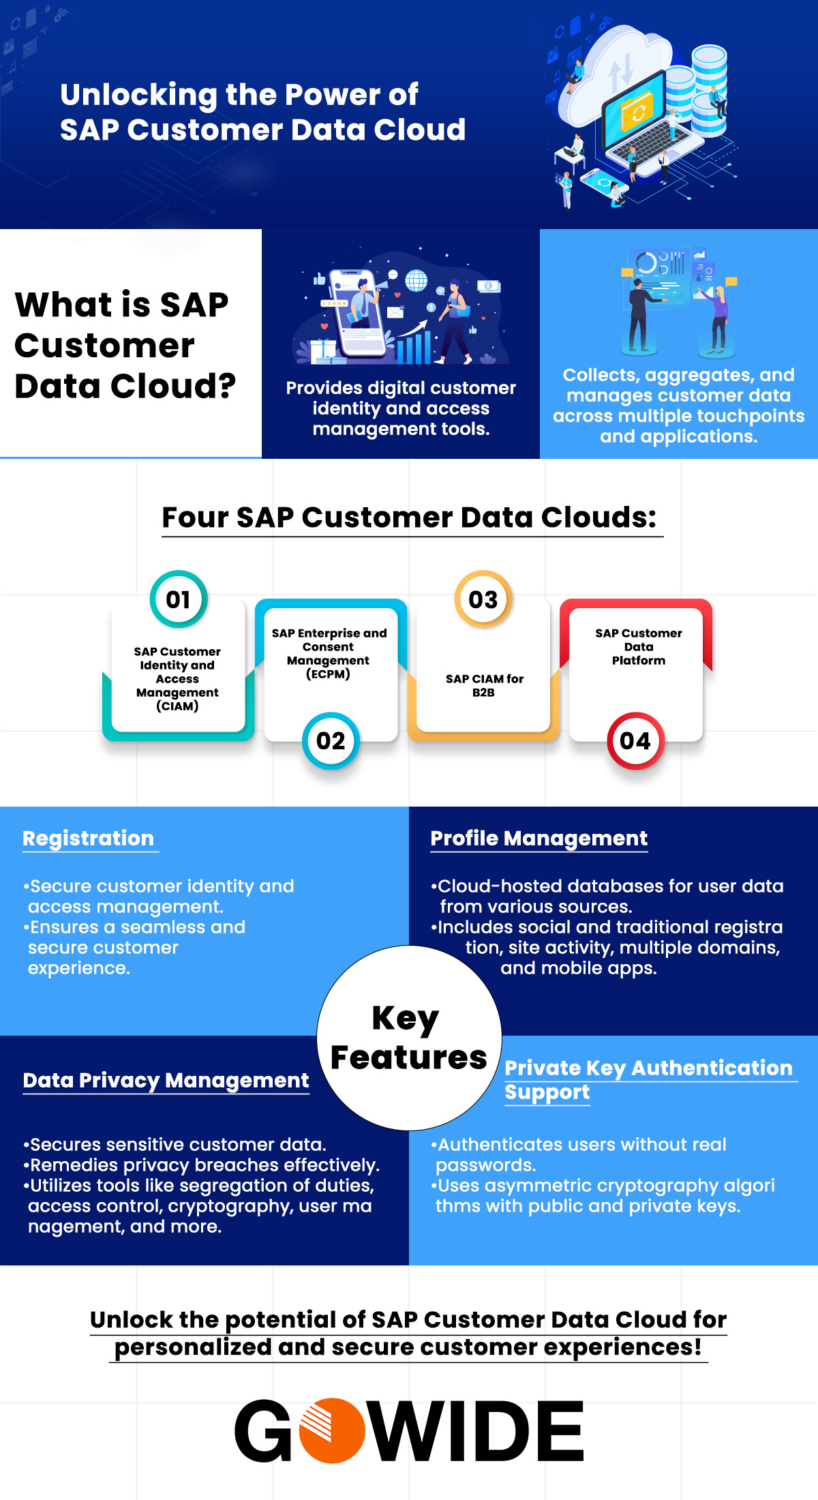 SAP Customer Data Cloud and Features infographic